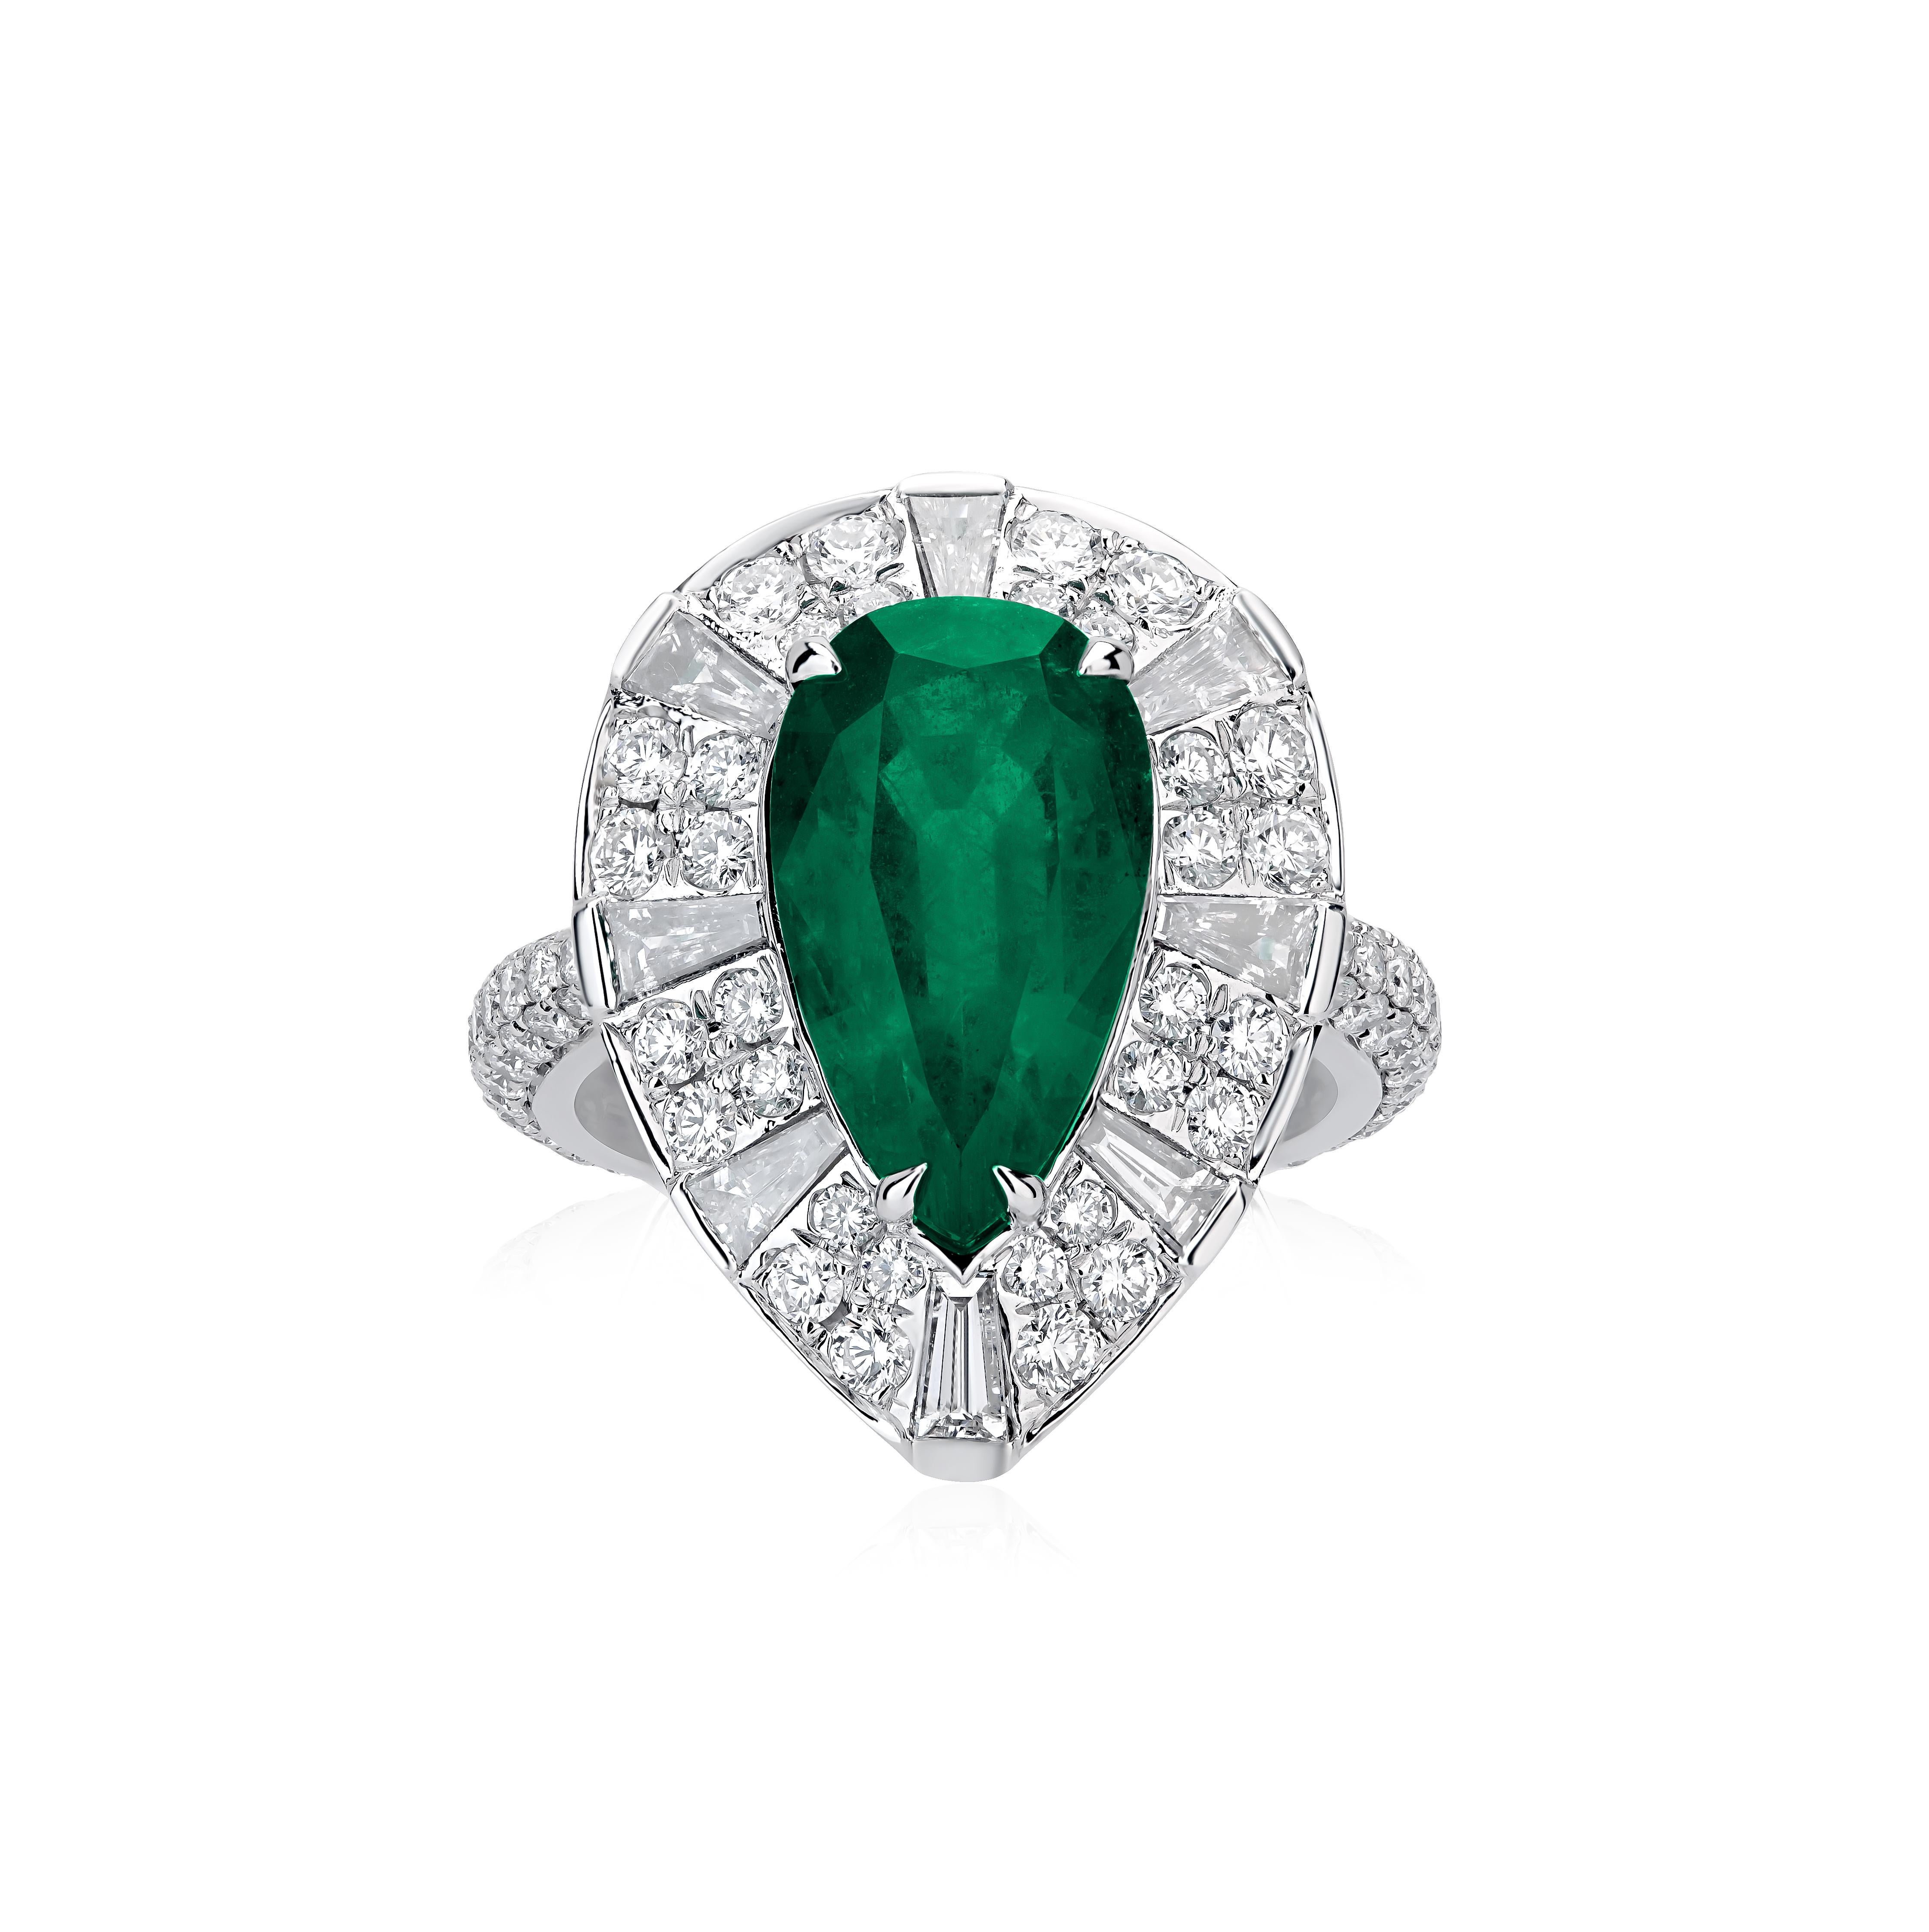 Contemporary Nigaam 4.94 Cts. Pear Emerald & 2.08 Cts Diamond Cocktail Ring in 18k White Gold